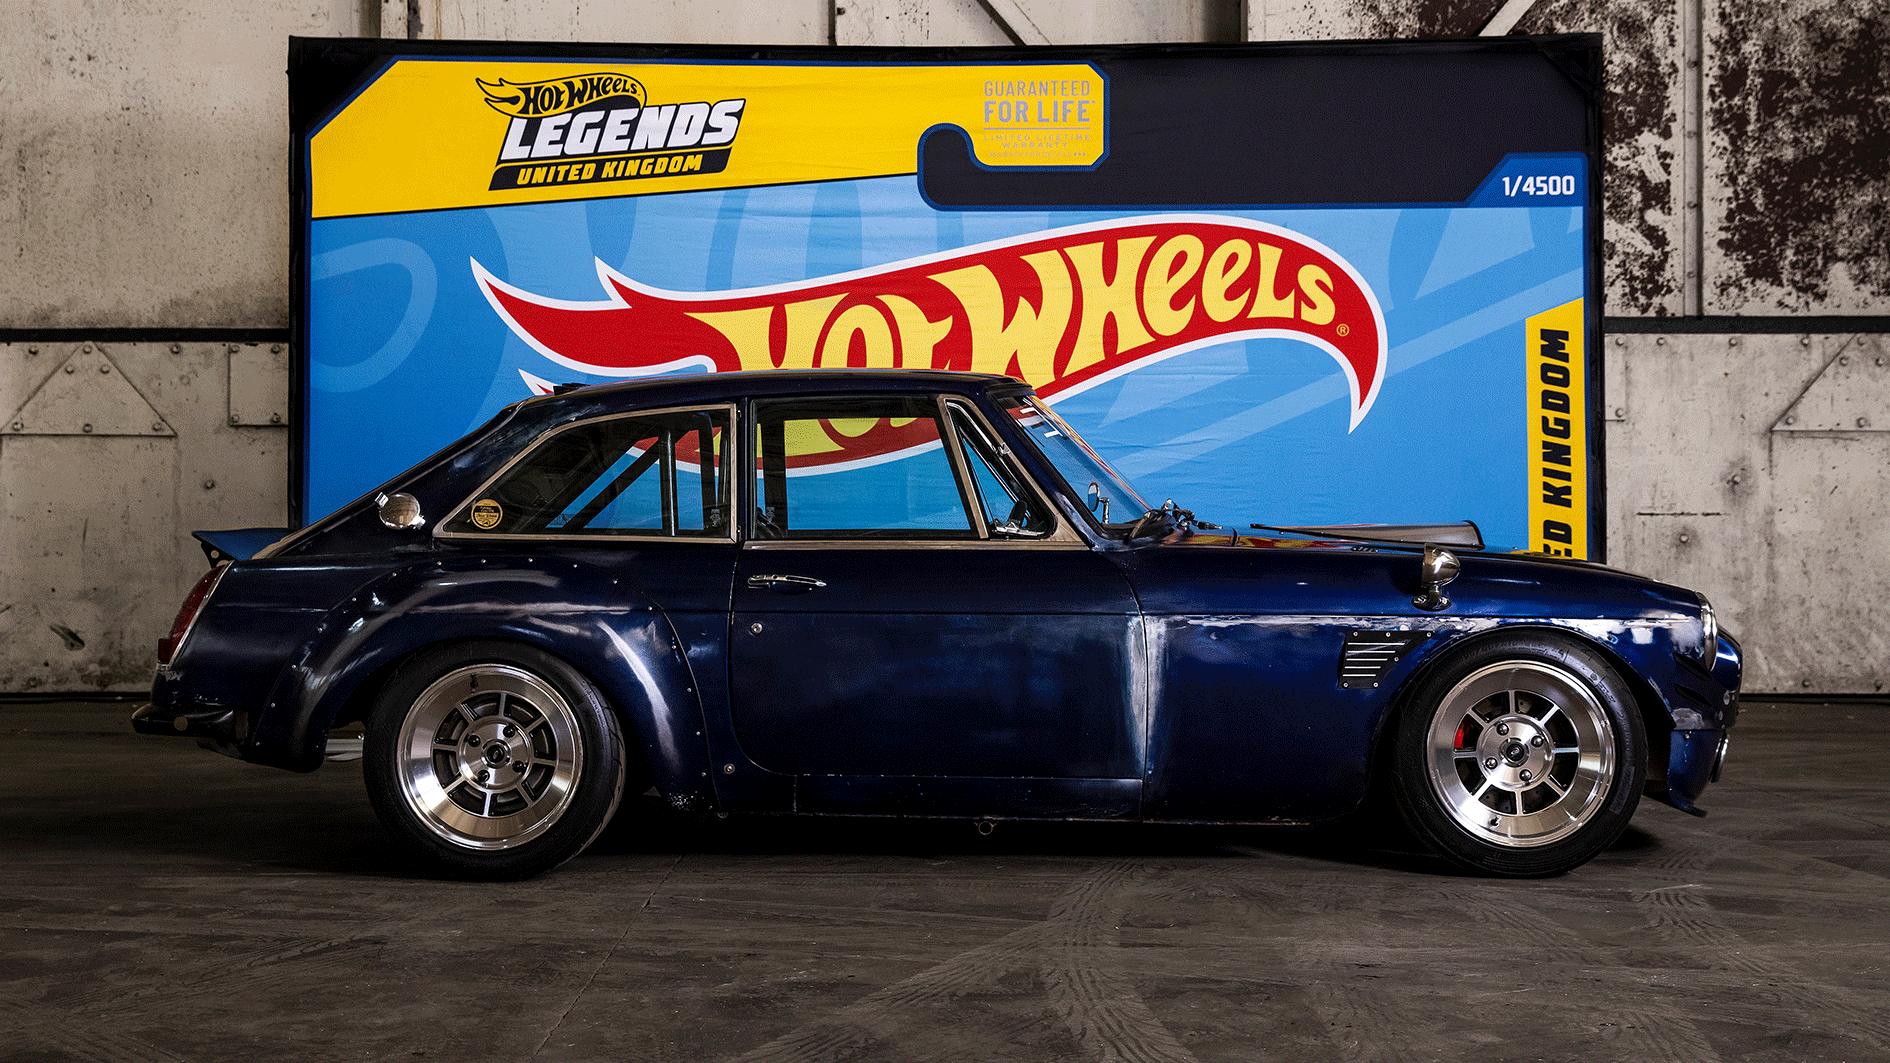 check out the 10 finalists for this year’s hot wheels legends tour